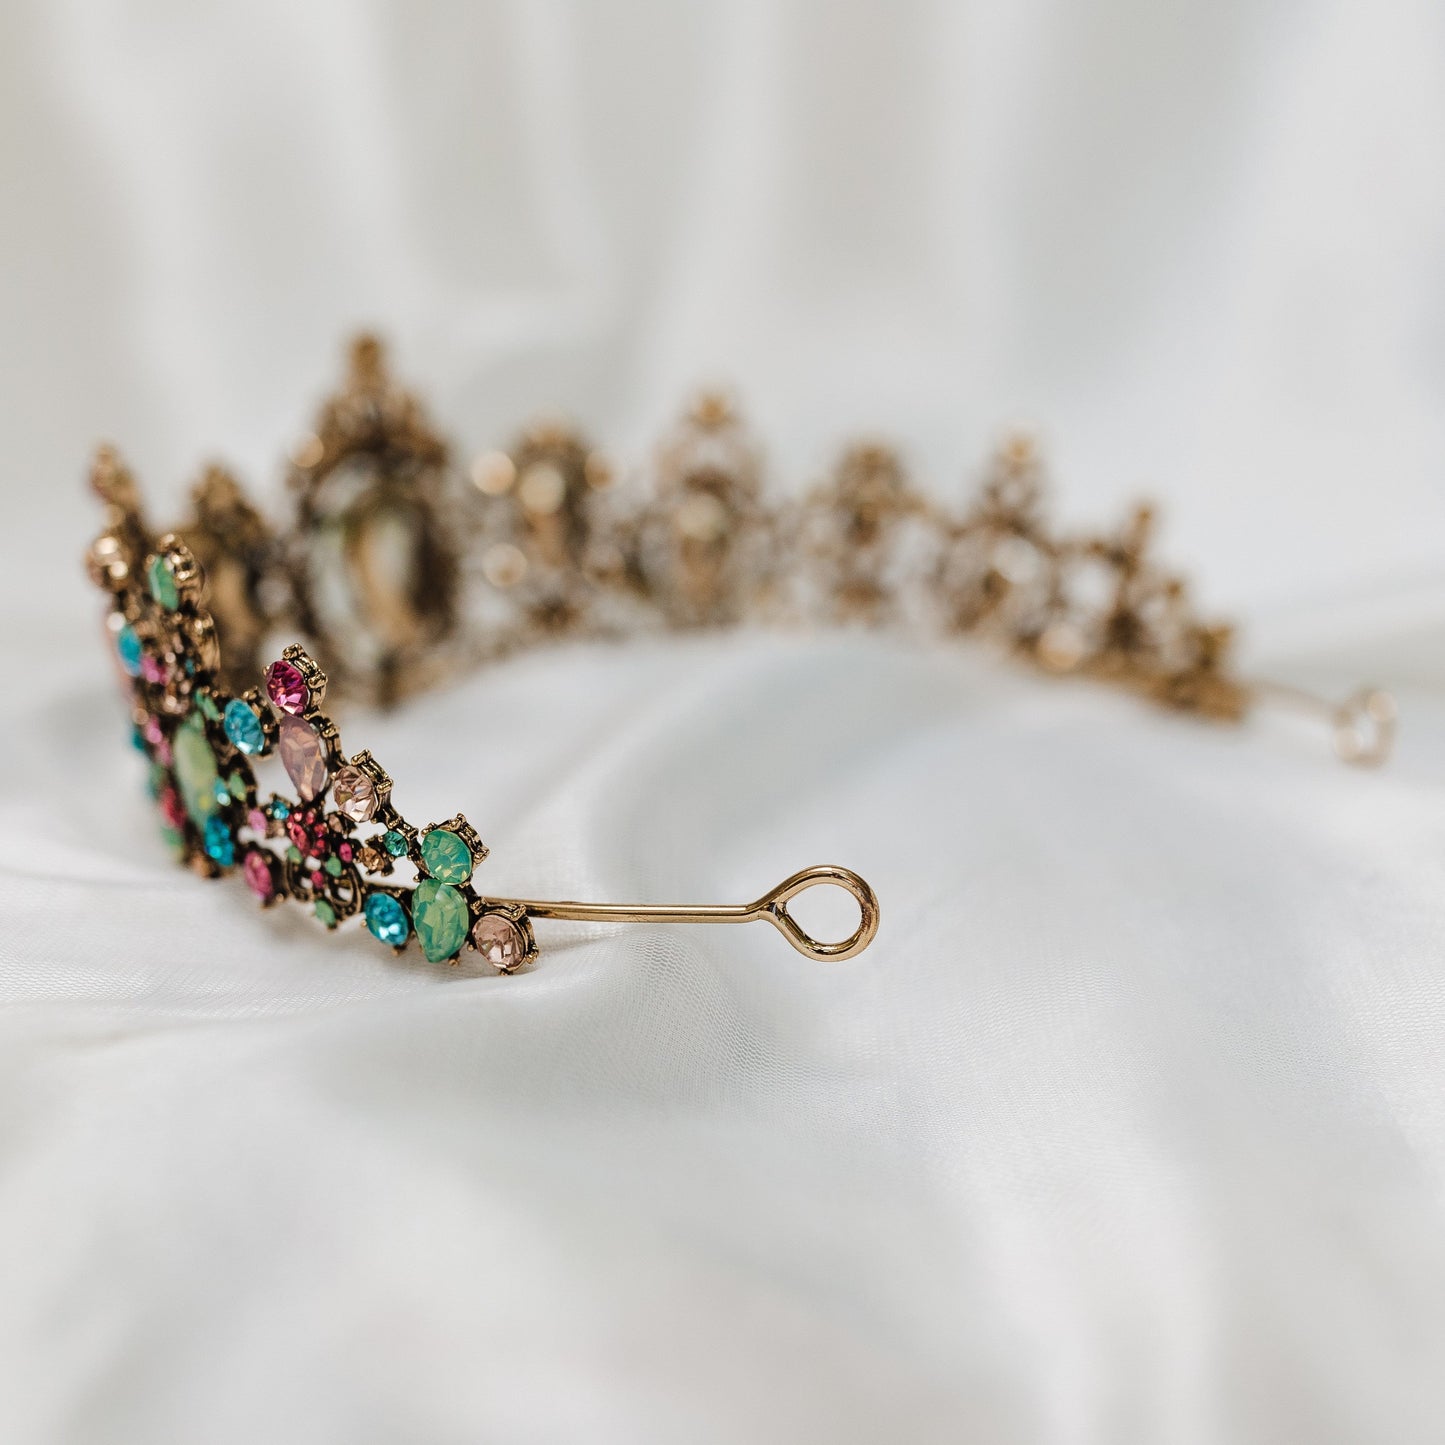 Tiara in Antique Gold, Pink and Blue Color Crystals